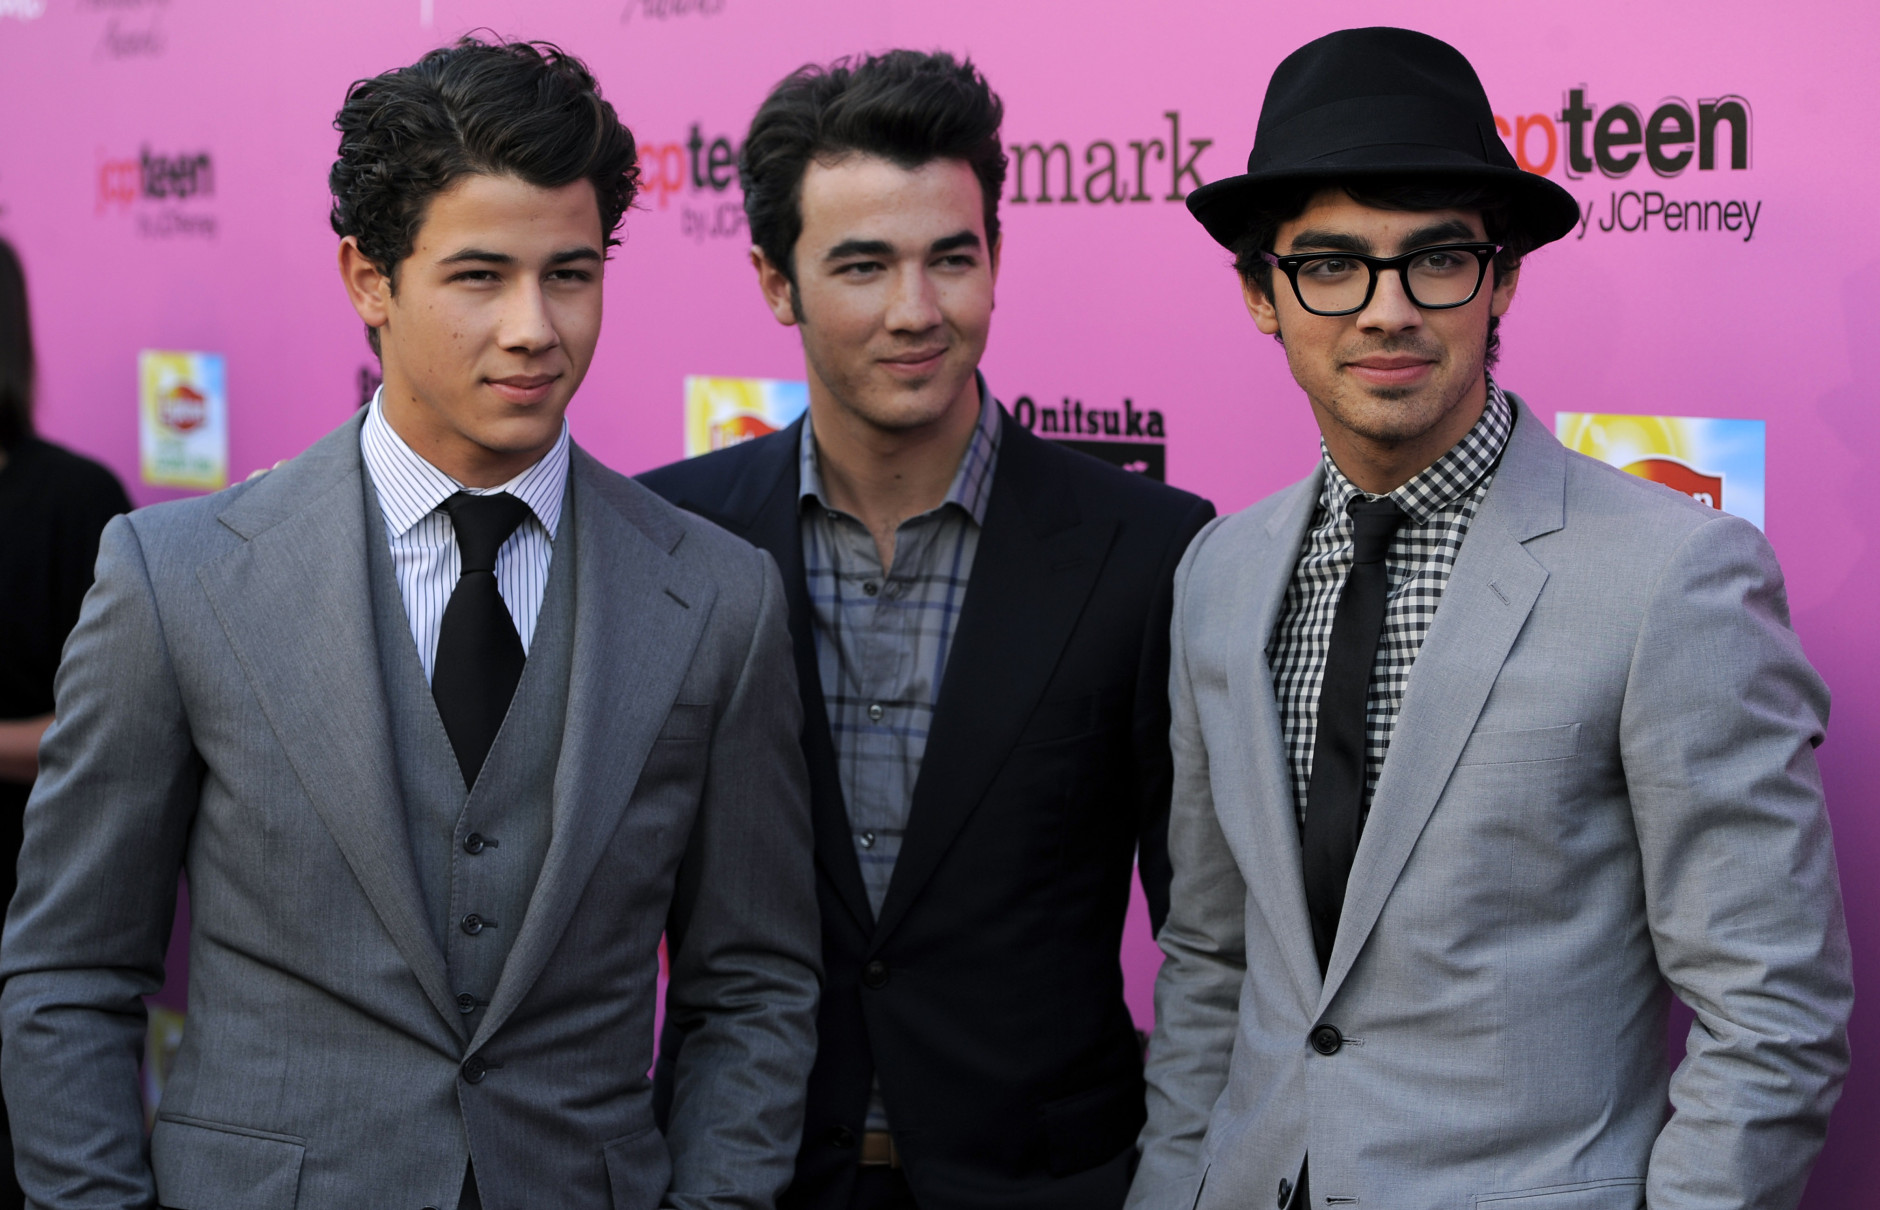 Nick Jonas, left, Joe Jonas, center, and Kevin Jonas of the Jonas Brothers pose together at the 12th Annual Young Hollywood Awards in Los Angeles, Thursday, May 13, 2010. (AP Photo/Chris Pizzello)